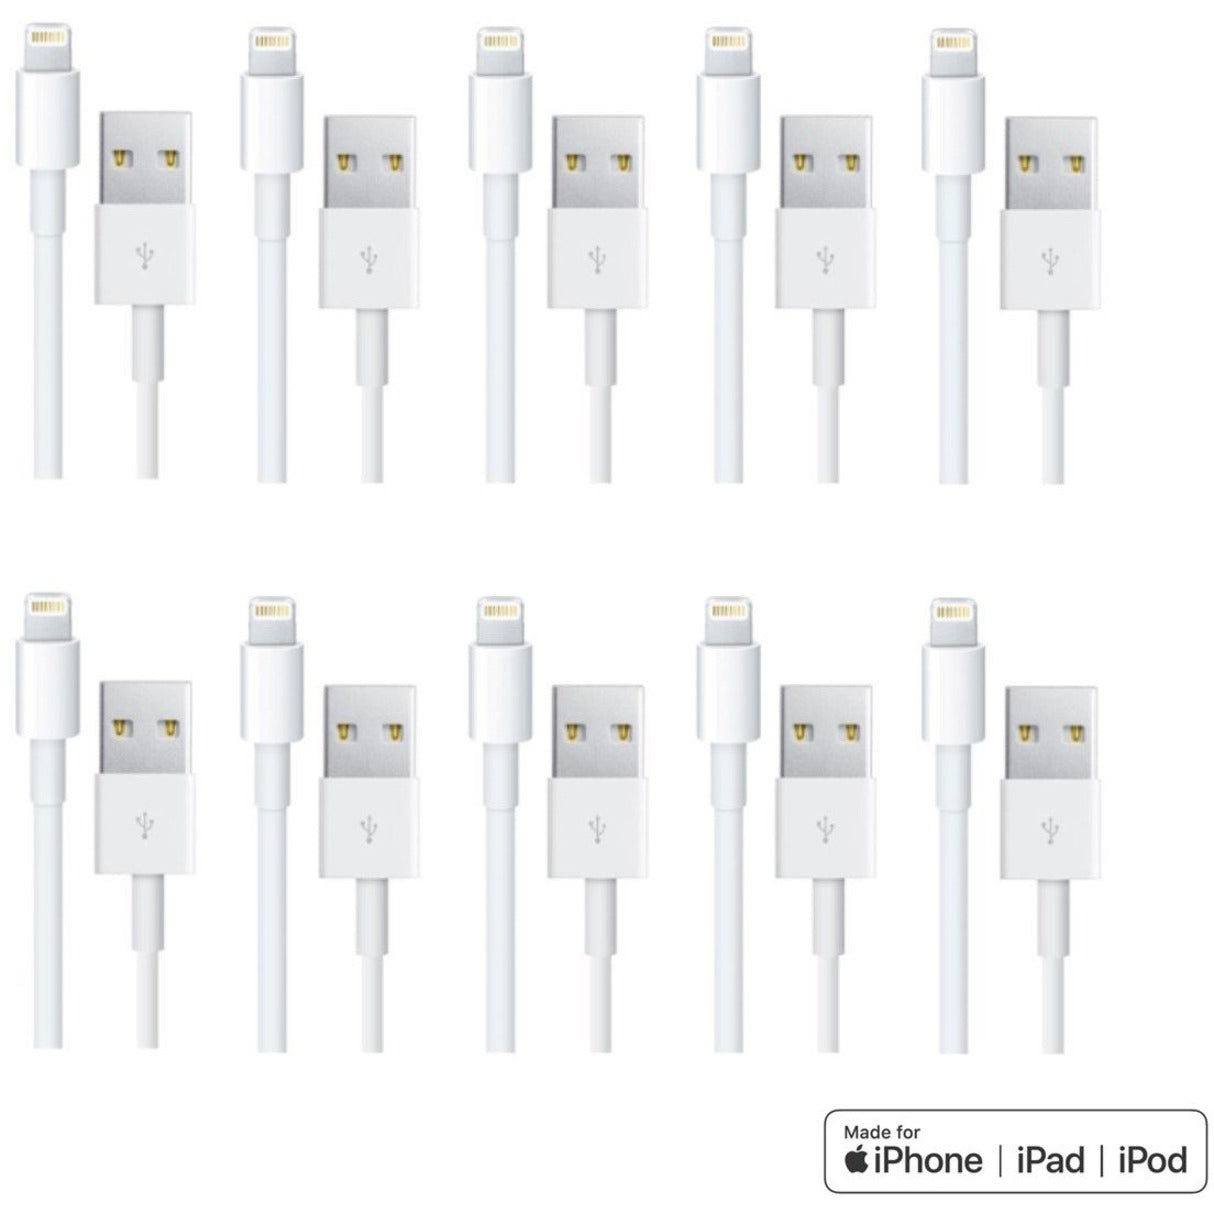 4XEM 4XLIGHTNING10PK Lightning Replacement Cables, 10 Pack of 3FT 8-Pin Lightning To USB Cable For iPhone/iPod/iPad (White) - MFi Certified